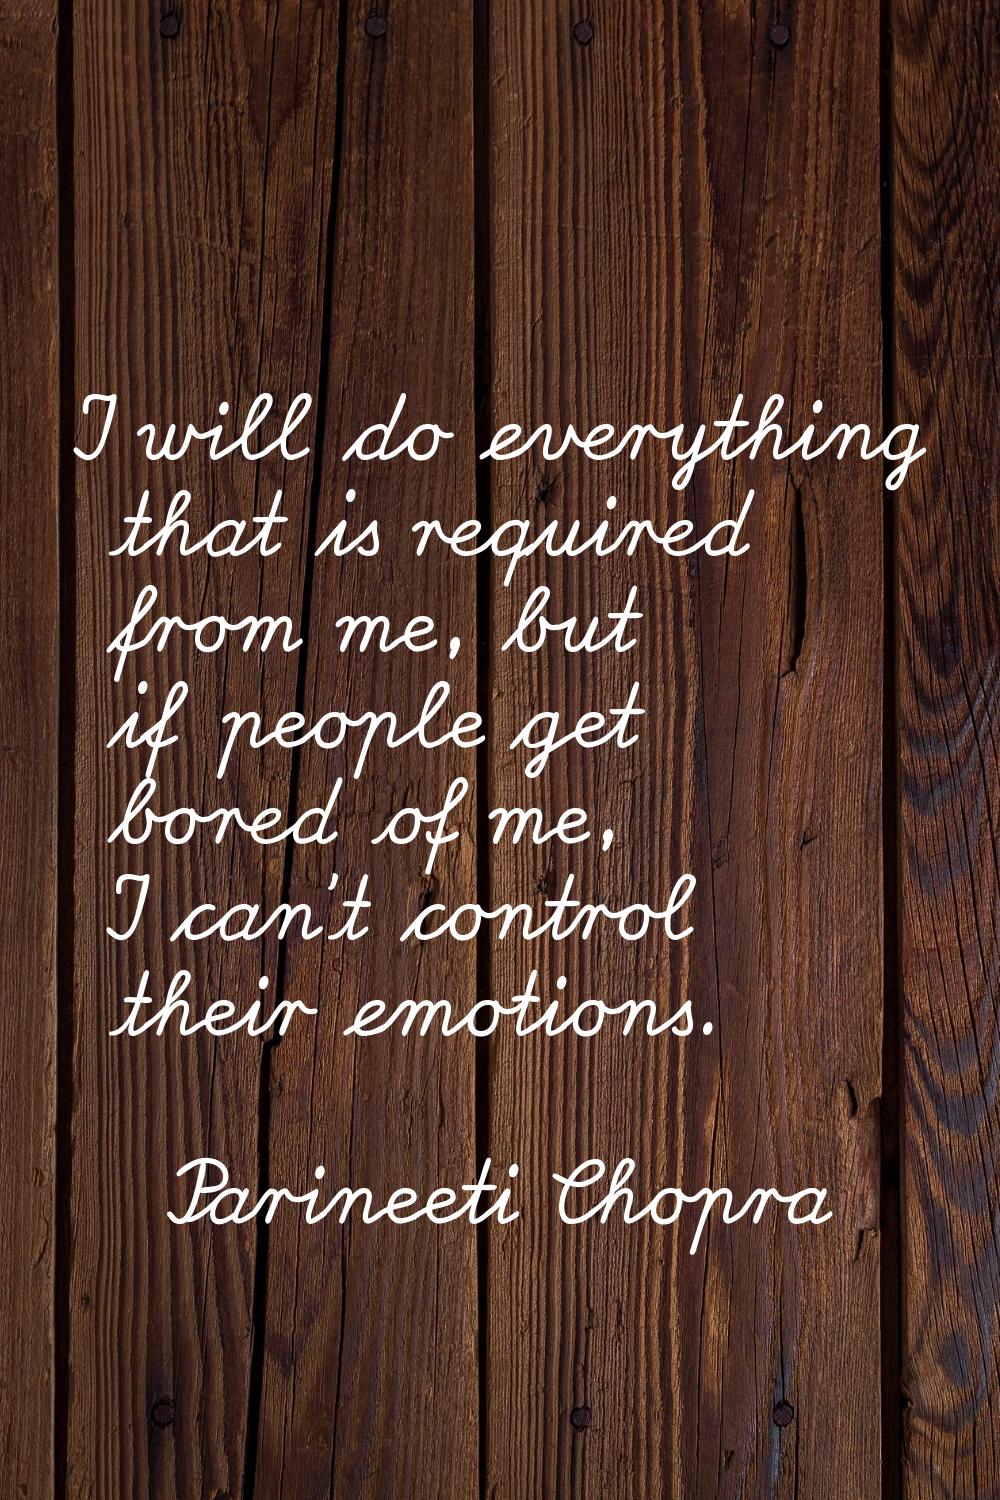 I will do everything that is required from me, but if people get bored of me, I can't control their